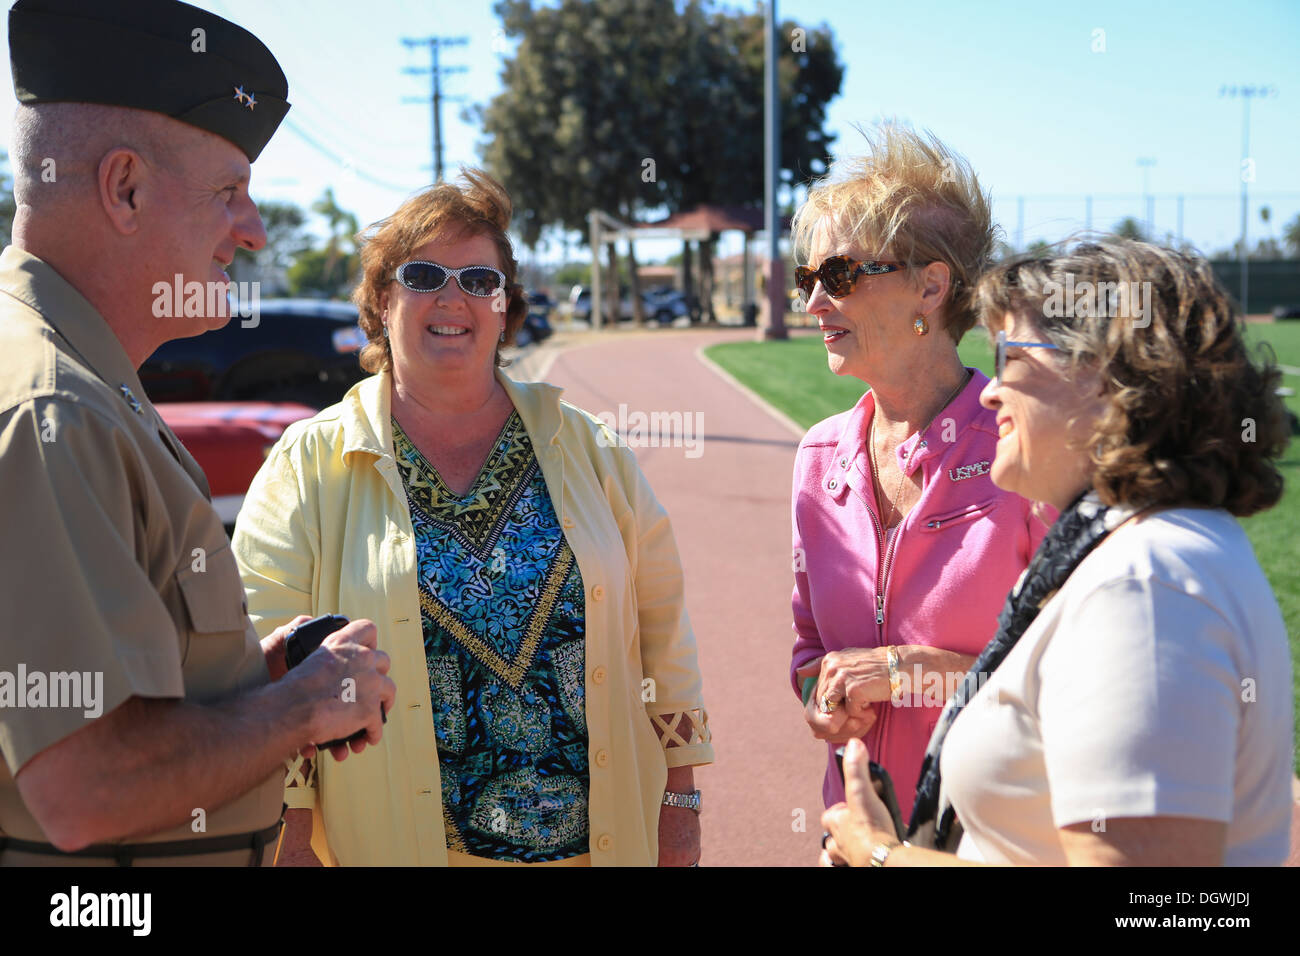 From left, U.S. Marine Corps Maj. Gen. Steven W. Busby, commanding general of the 3rd Marine Aircraft Wing; Mrs. Cindy Busby, Mrs. Bonnie Amos, First Lady of the Marine Corps and Mrs. Helen Toolan, wife of Lt. Gen. John A Toolan, commanding general of the Stock Photo